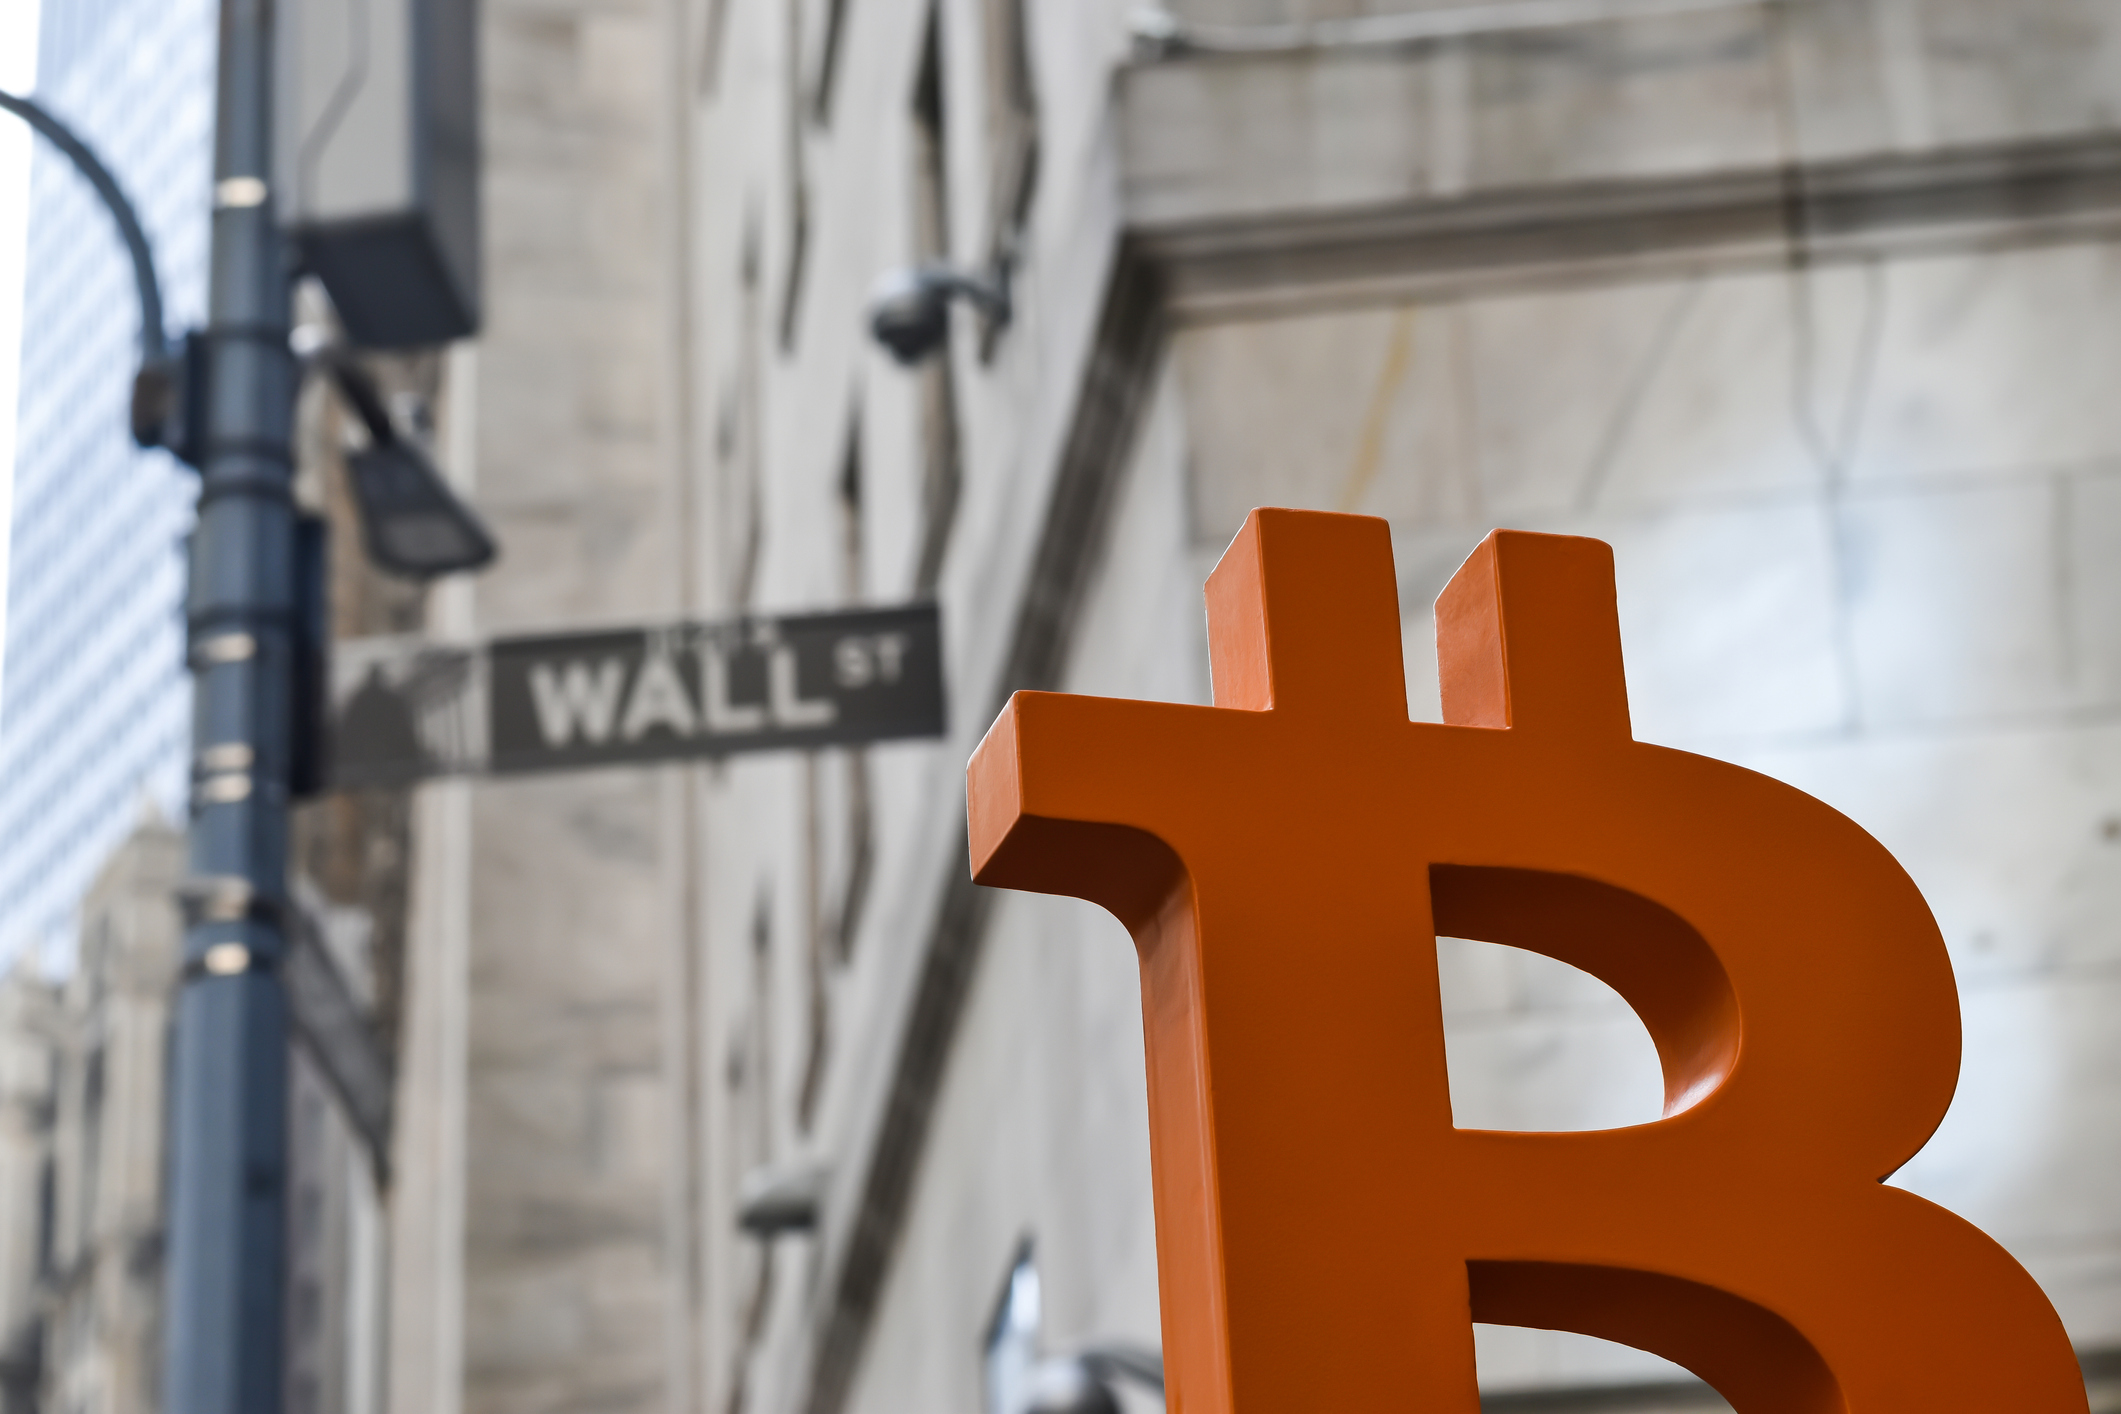 Bitcoin and Ethereum Allocations on Wall Street Have Reached Year-Highs; What Does the Future Hold for the Price of Bitcoin?